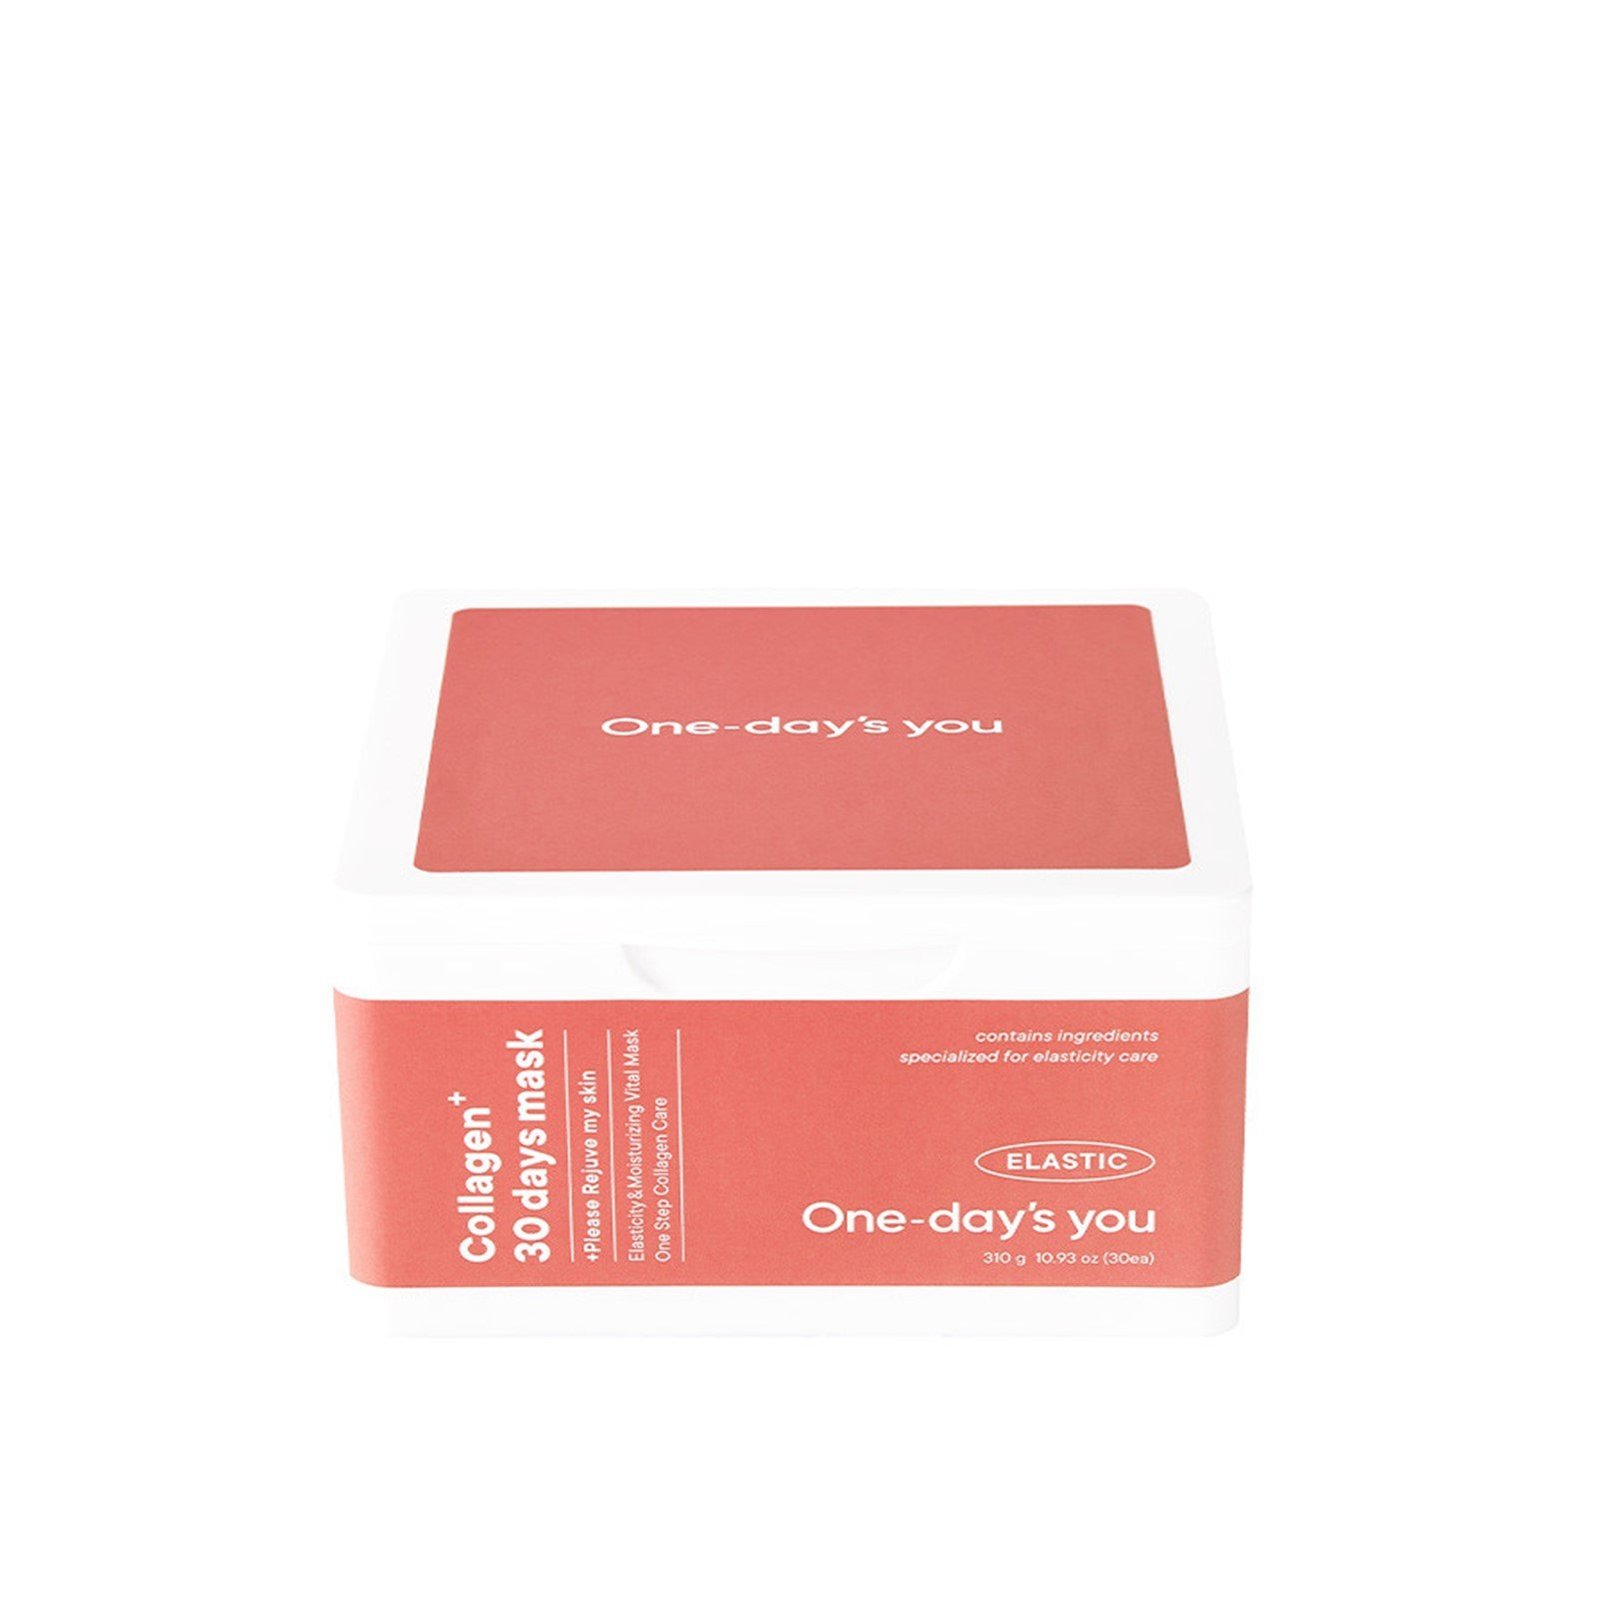 One-day's you Collagen 30 Days Mask x30 (10.93 oz)